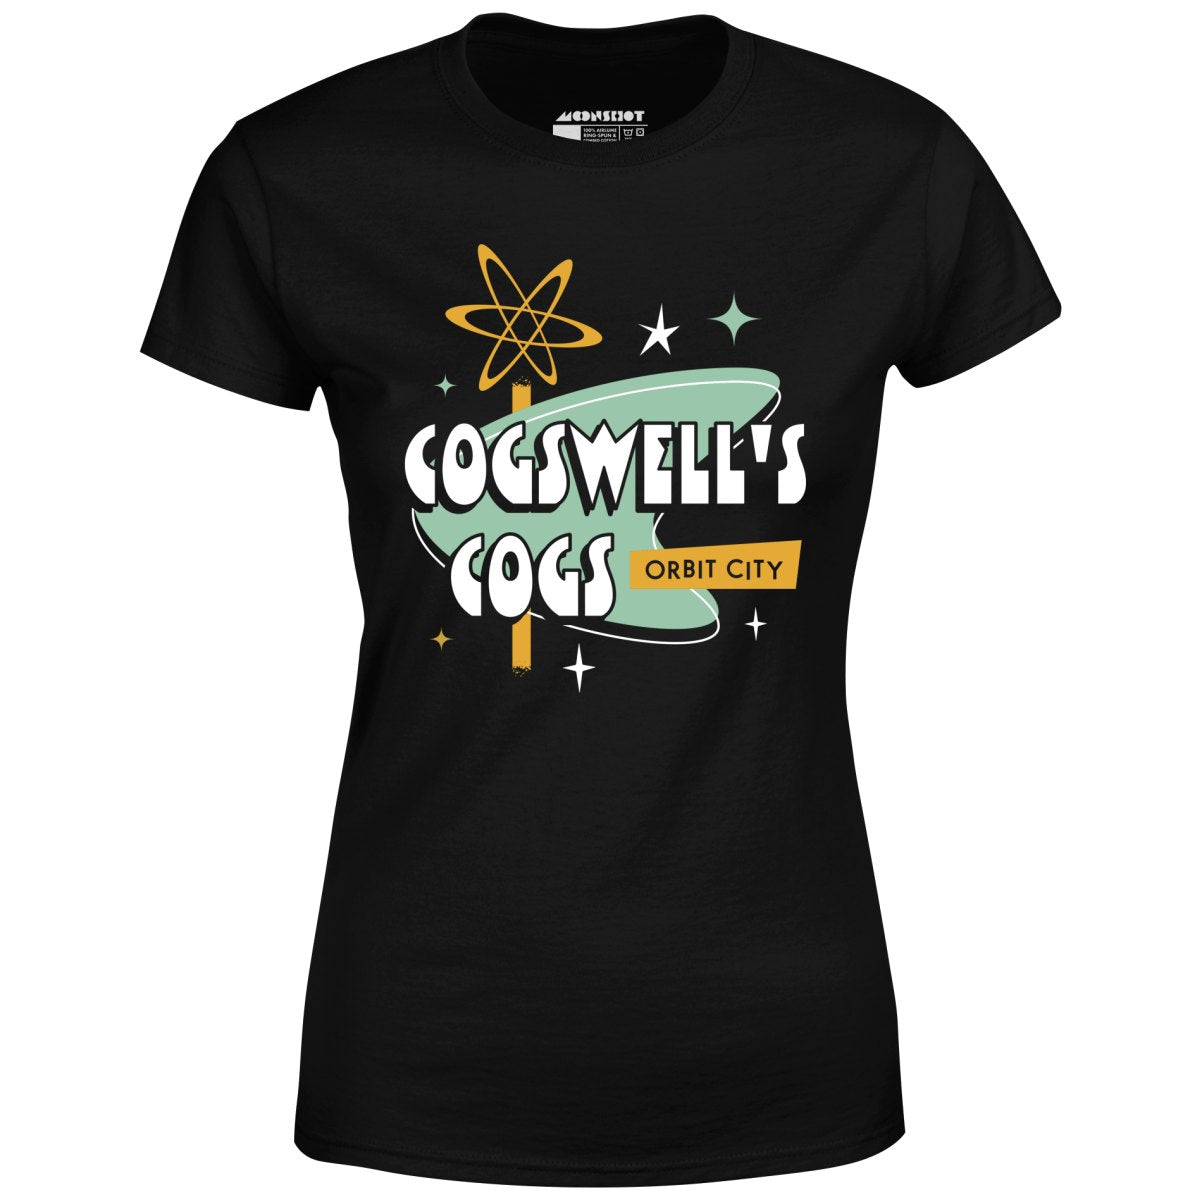 Cogswell's Cogs - Women's T-Shirt